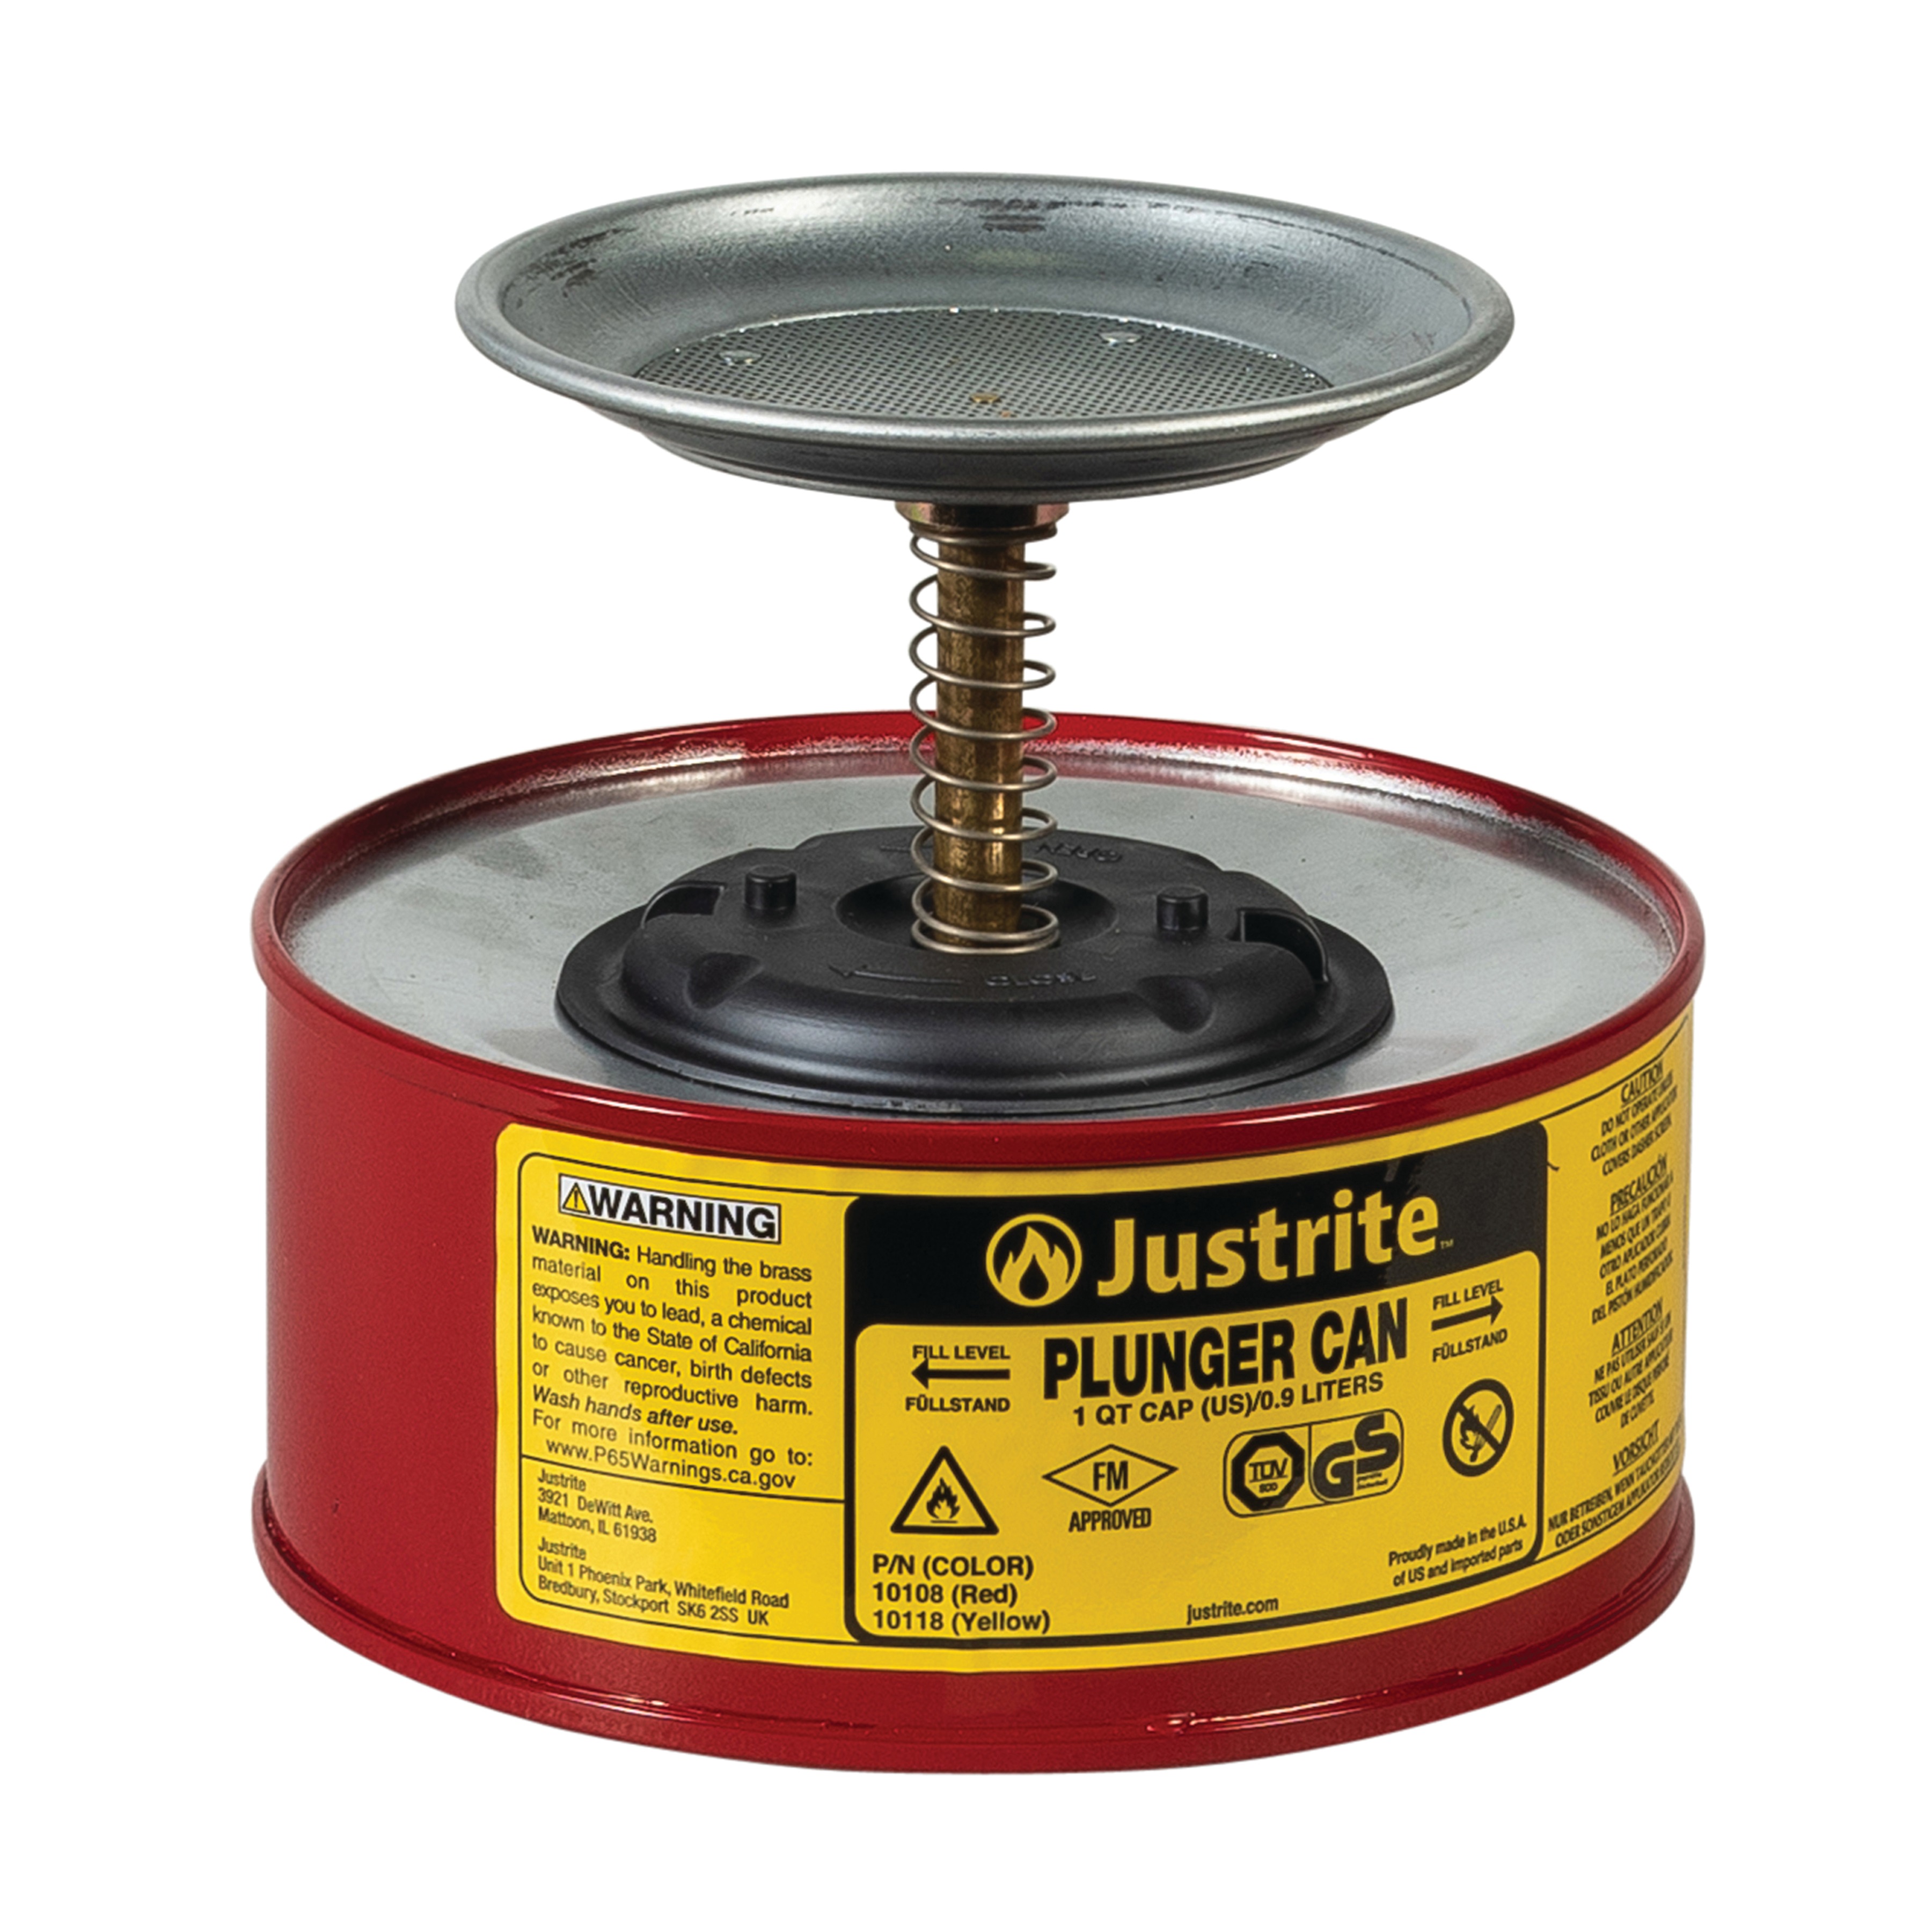 Justrite Safety Plunger Cans - Red